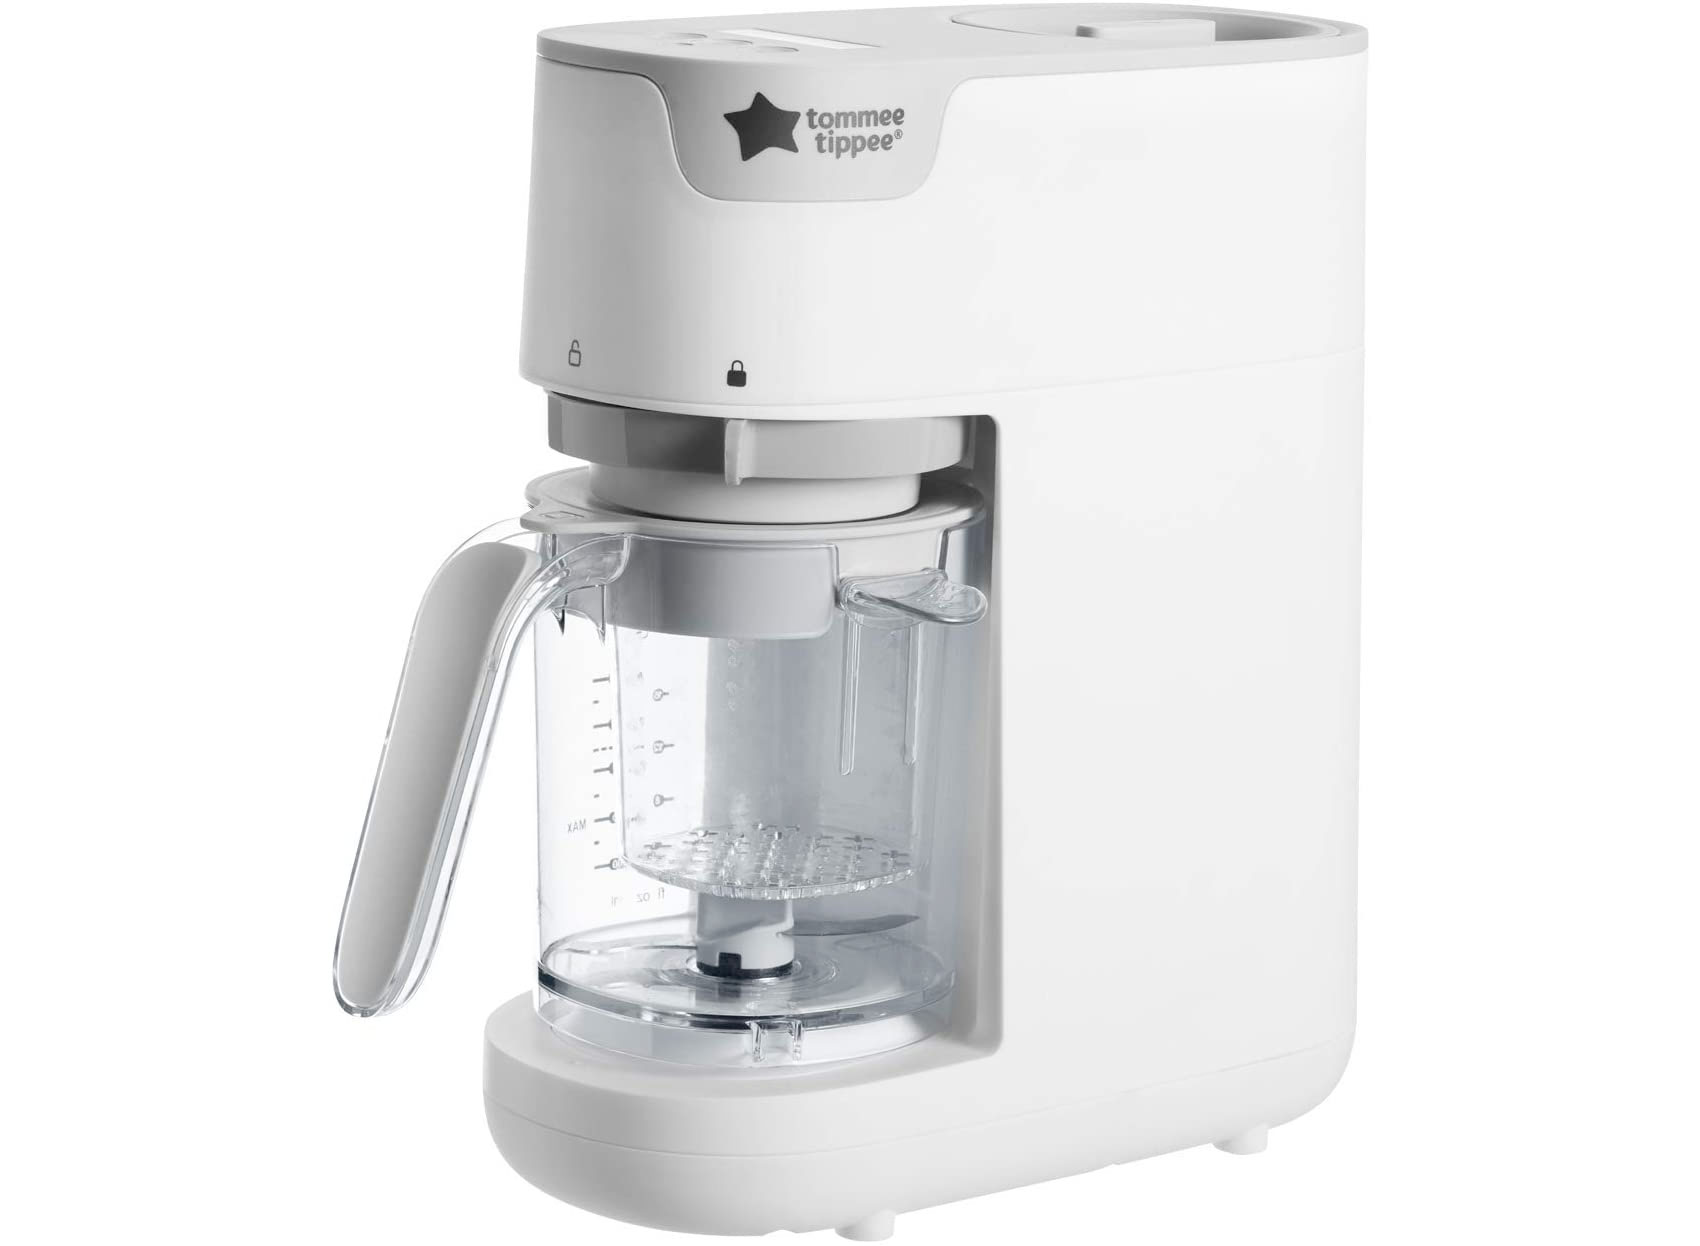 Amazon：Tommee Tippee Quick Cook Baby Food Maker只卖$49.98